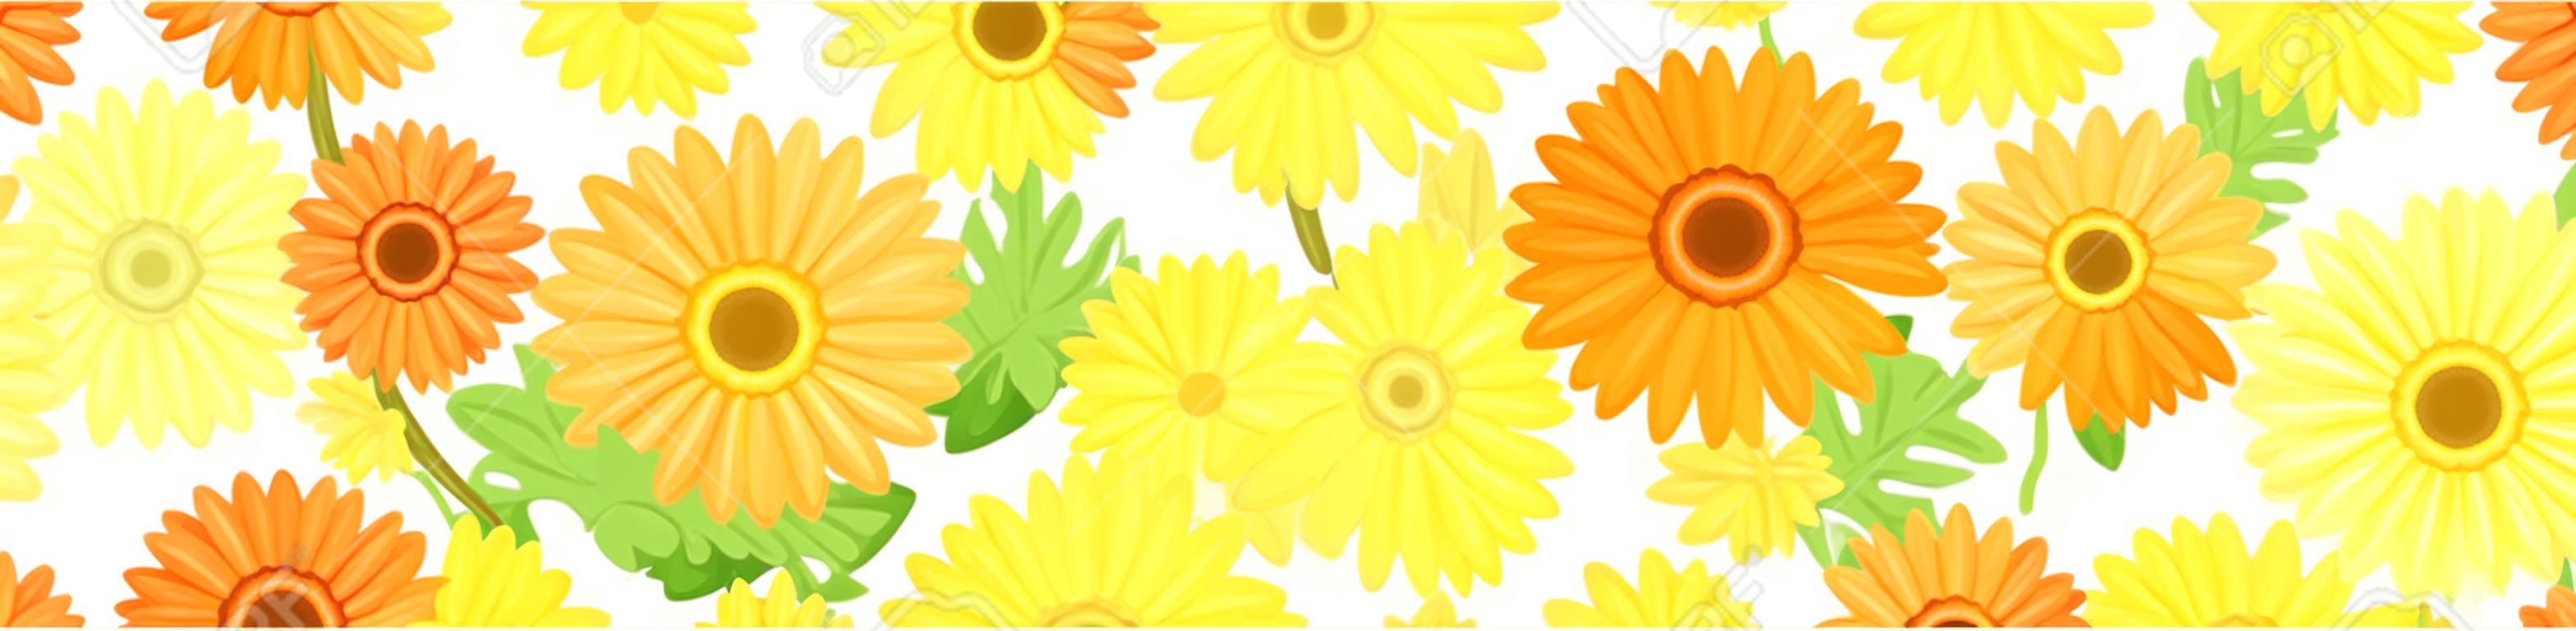 Horizontal seamless background with colored gerbera.  illustration.